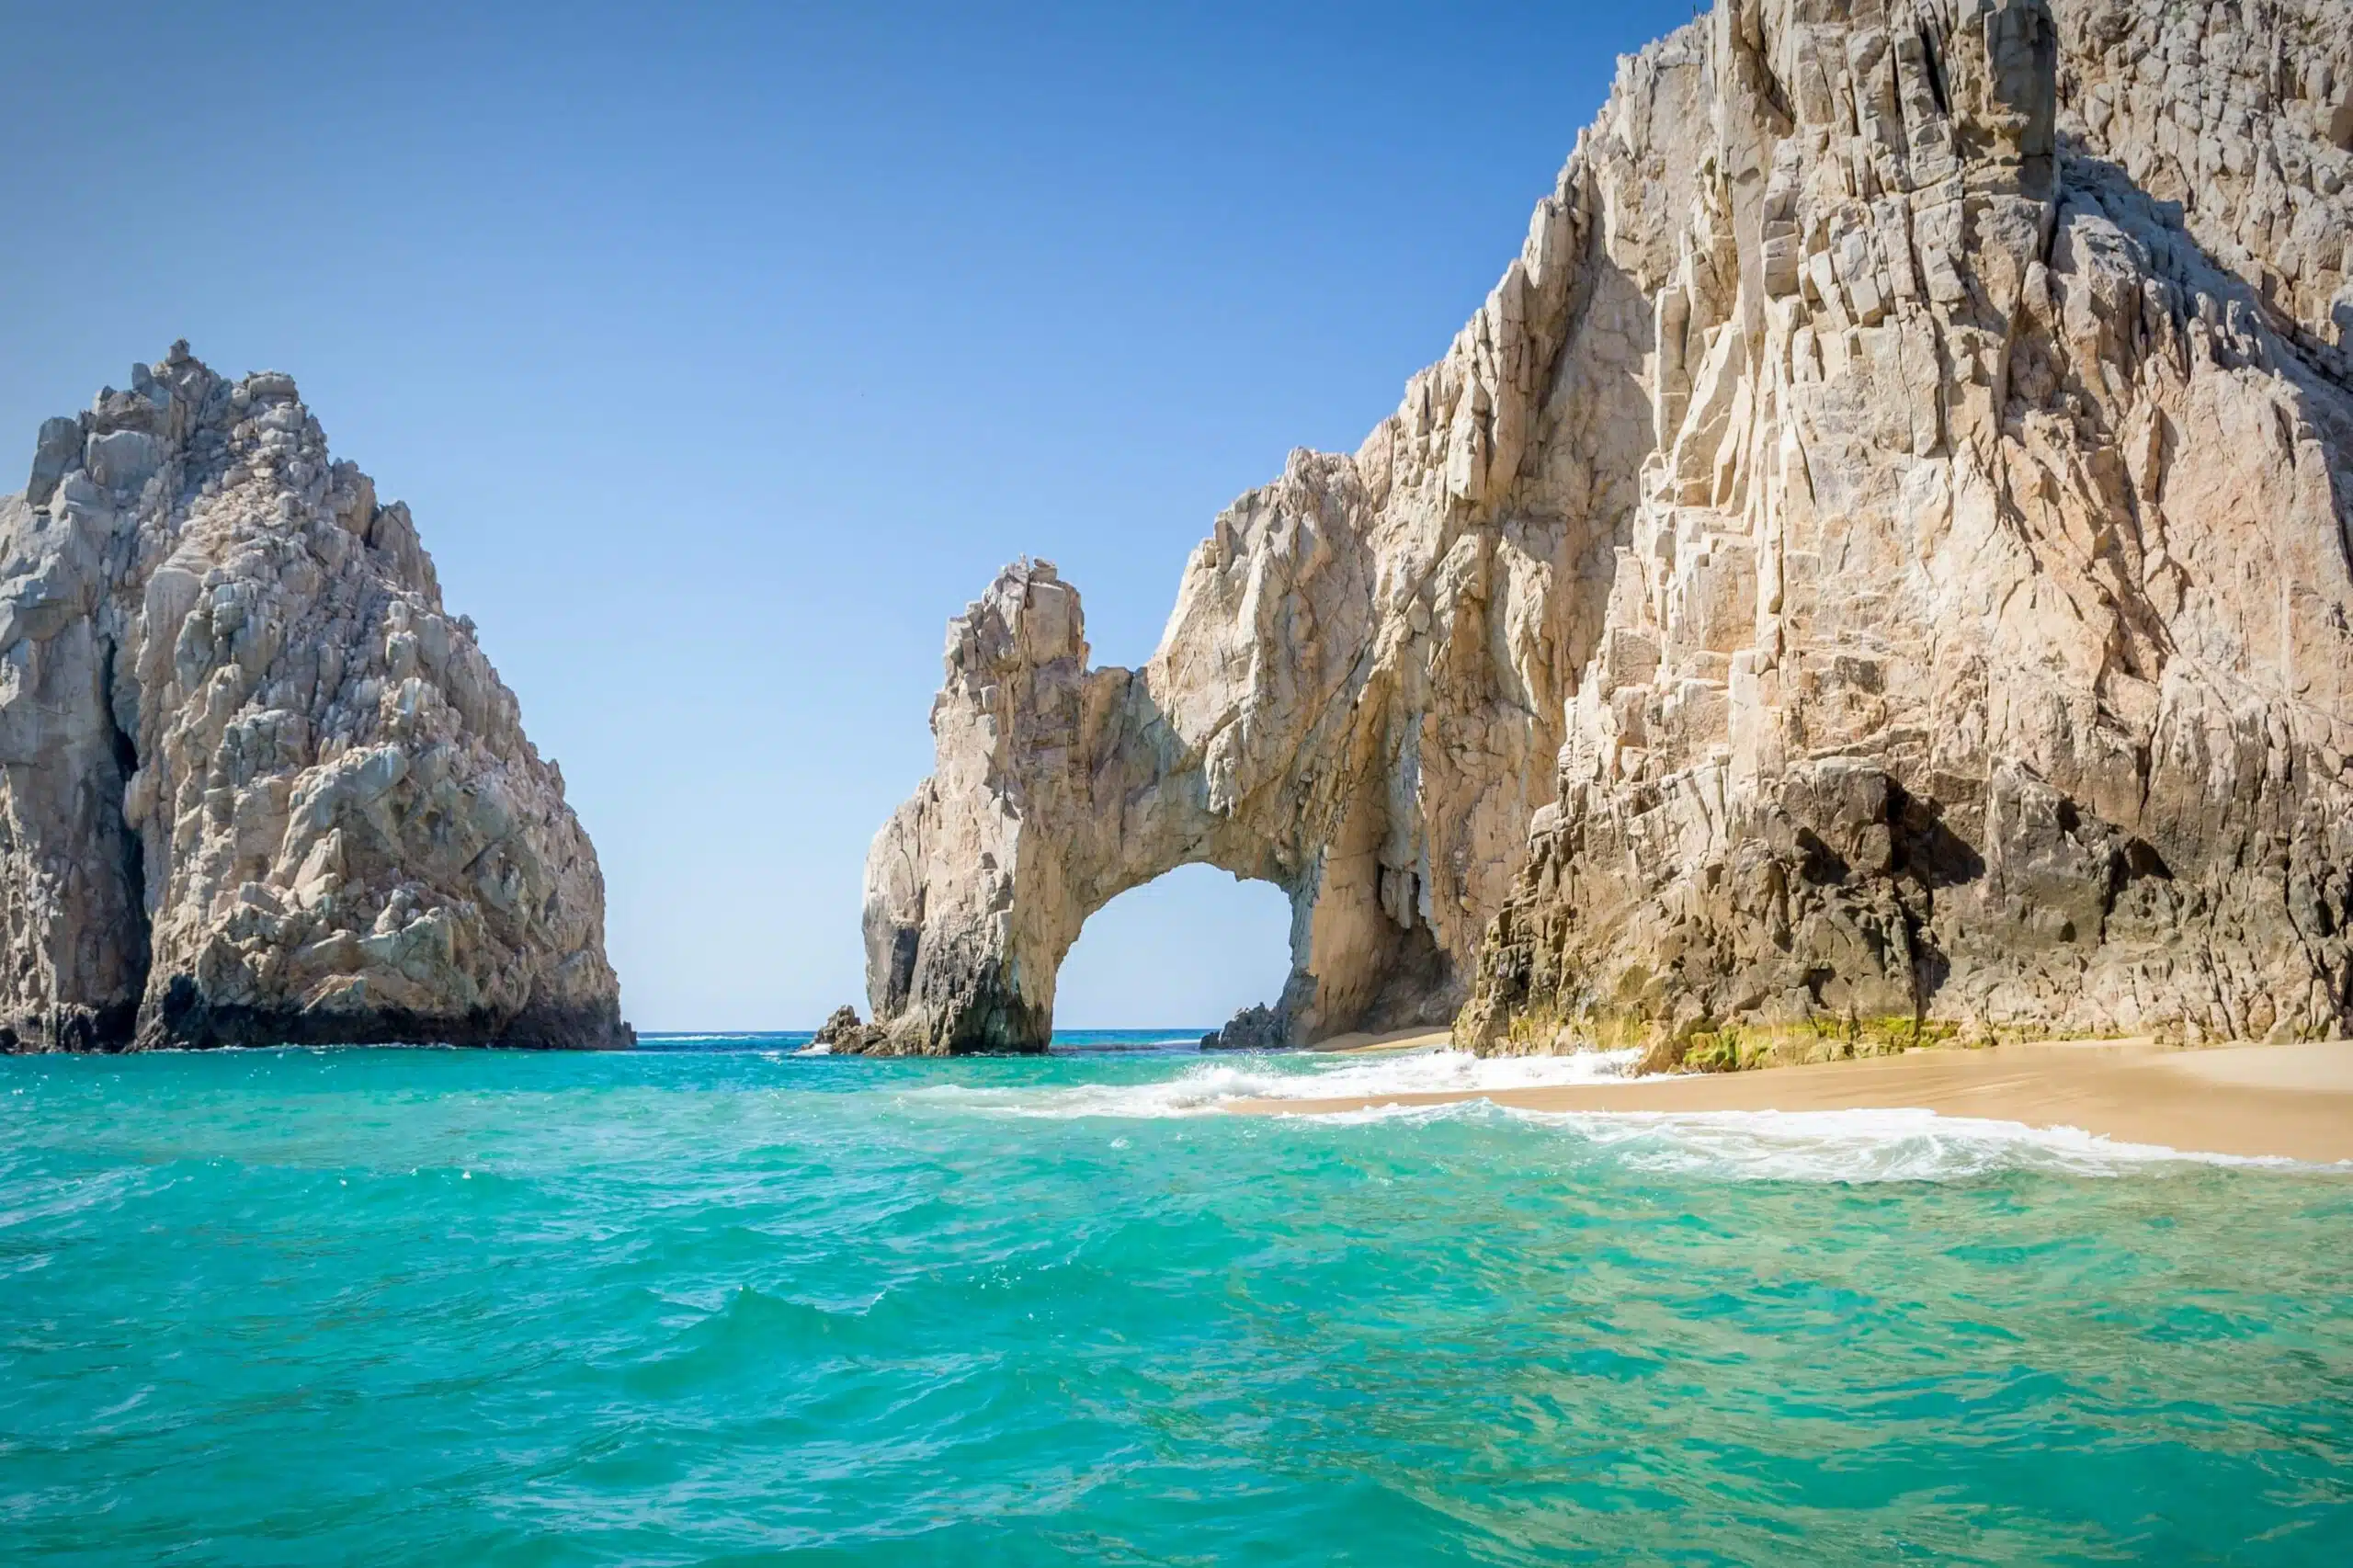 Lands End Arch is part of the History Of Cabo San Lucas.